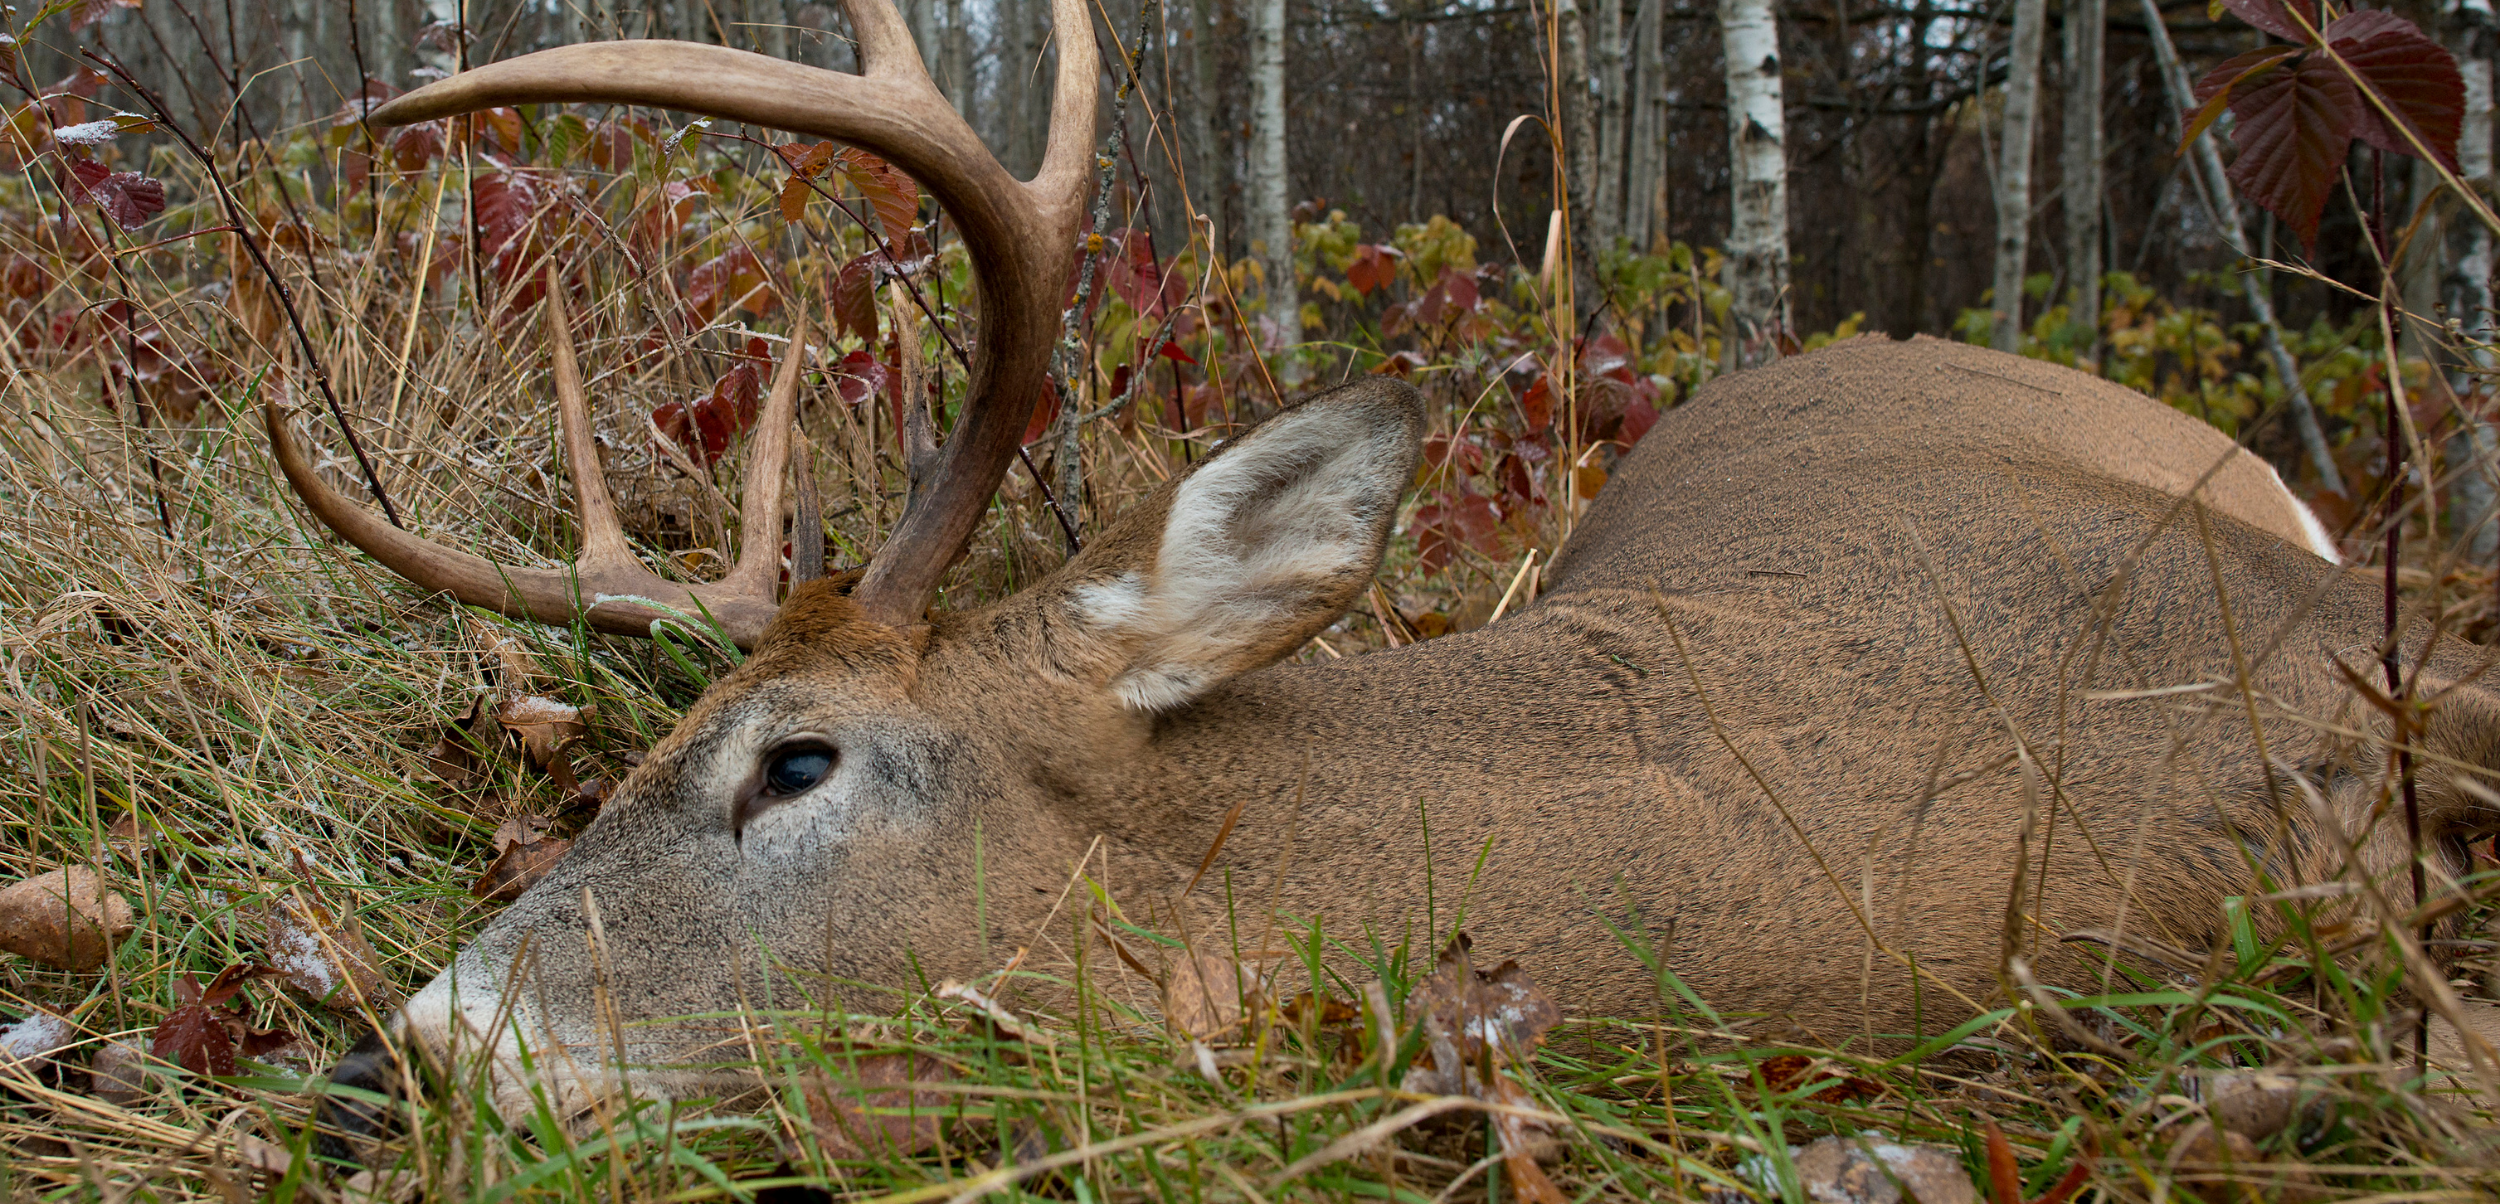   4 point Sitka black tail deer | Kodiak Marine Charters   Access remote hunting areas around Kodiak, Alaska!  We do drop off/pick up transportation trips or can offer a full package including transportation, lodging and meals for the duration of you